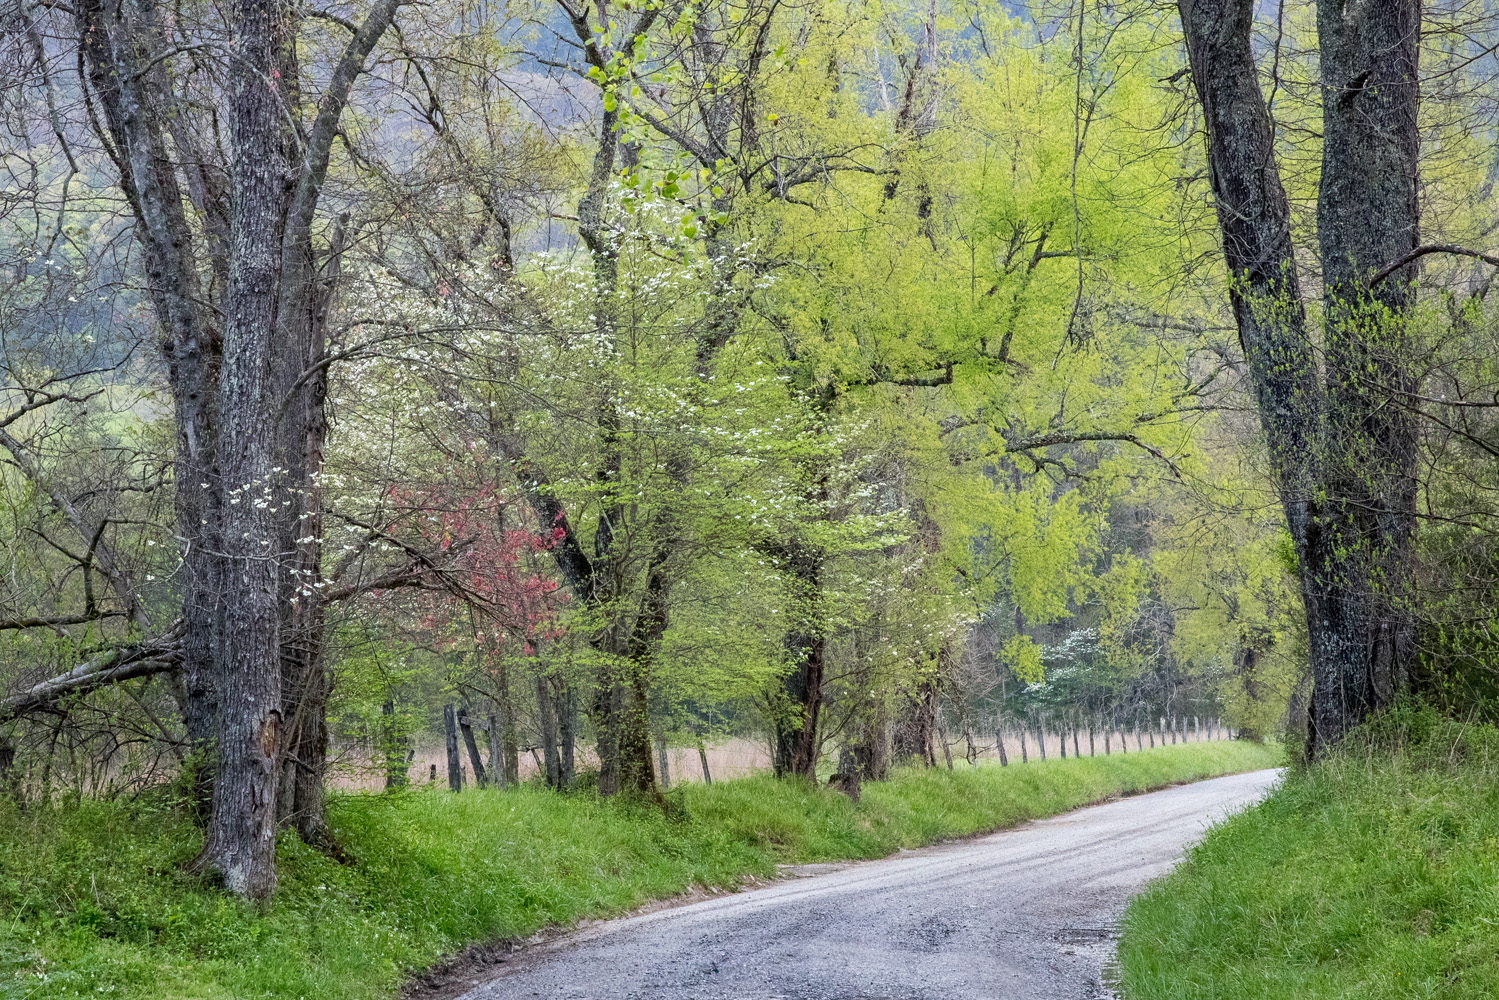 Dogwood blossoms and tender green leaves emerge in early spring along Sparks Lane.